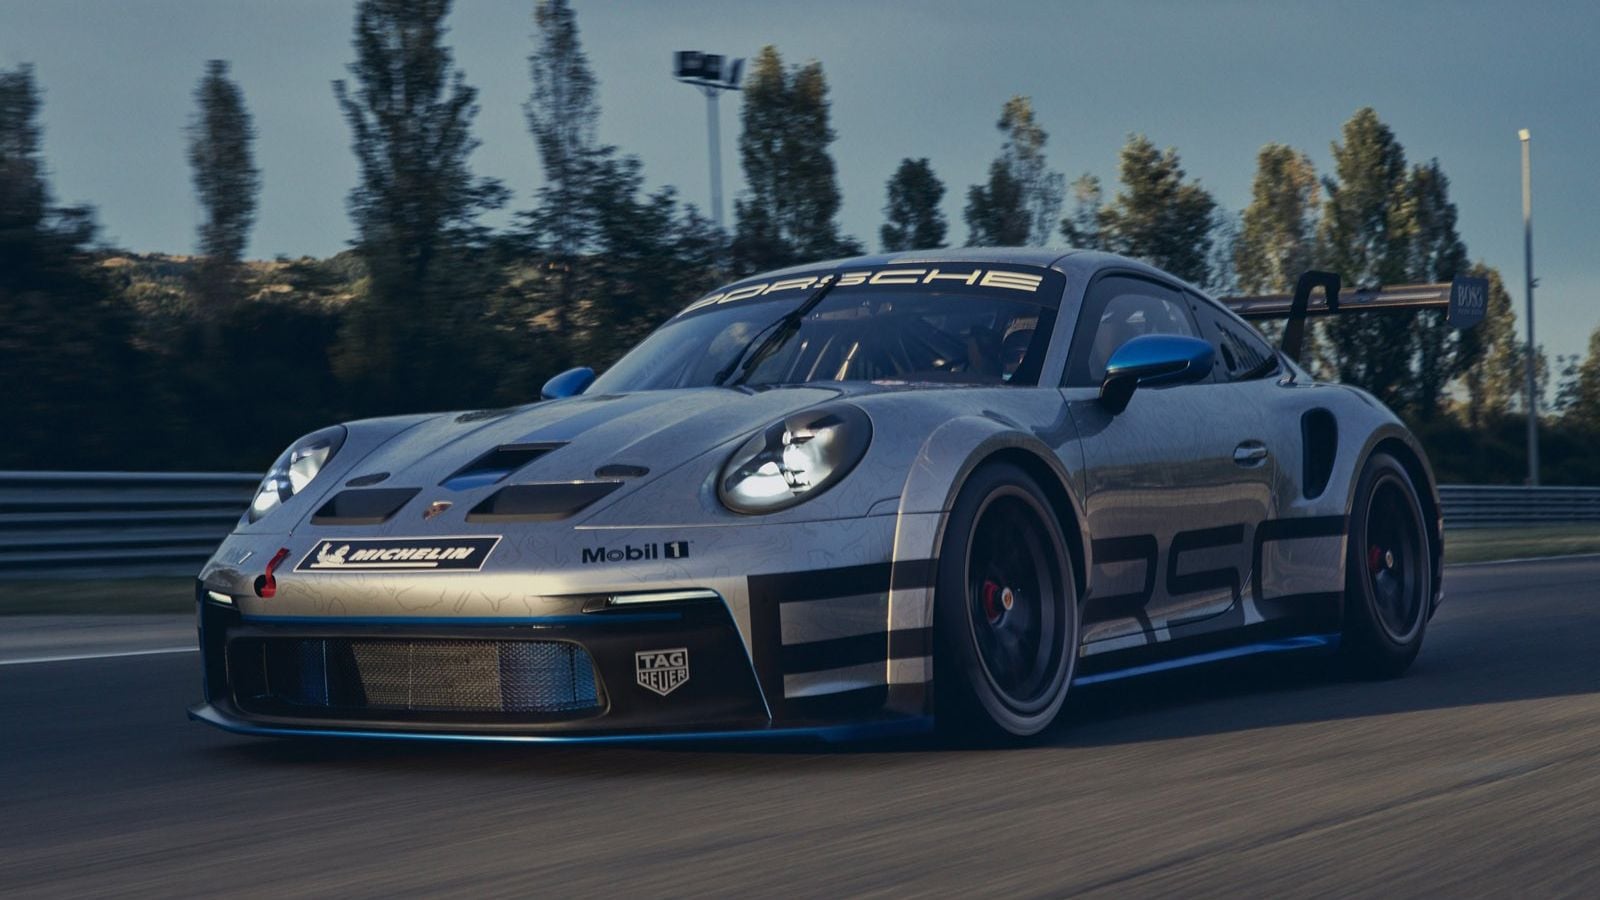 The New Widebody Gt Cup Car Stuns Rennlist